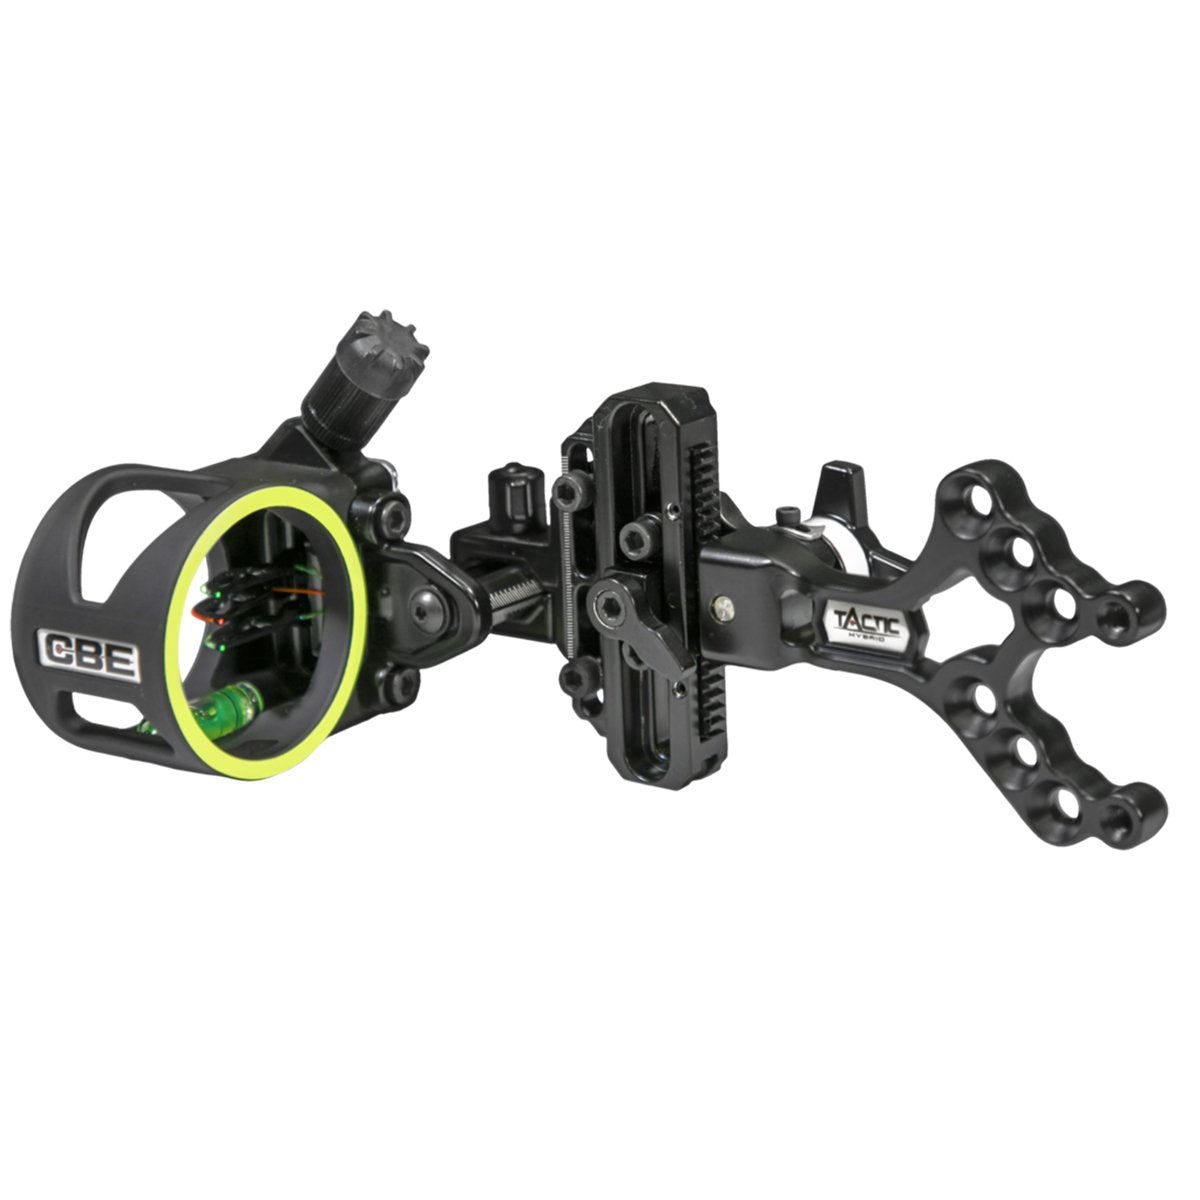 CBE Tactic Hybrid Single Pin Bowsight in  by GOHUNT | CBE - GOHUNT Shop